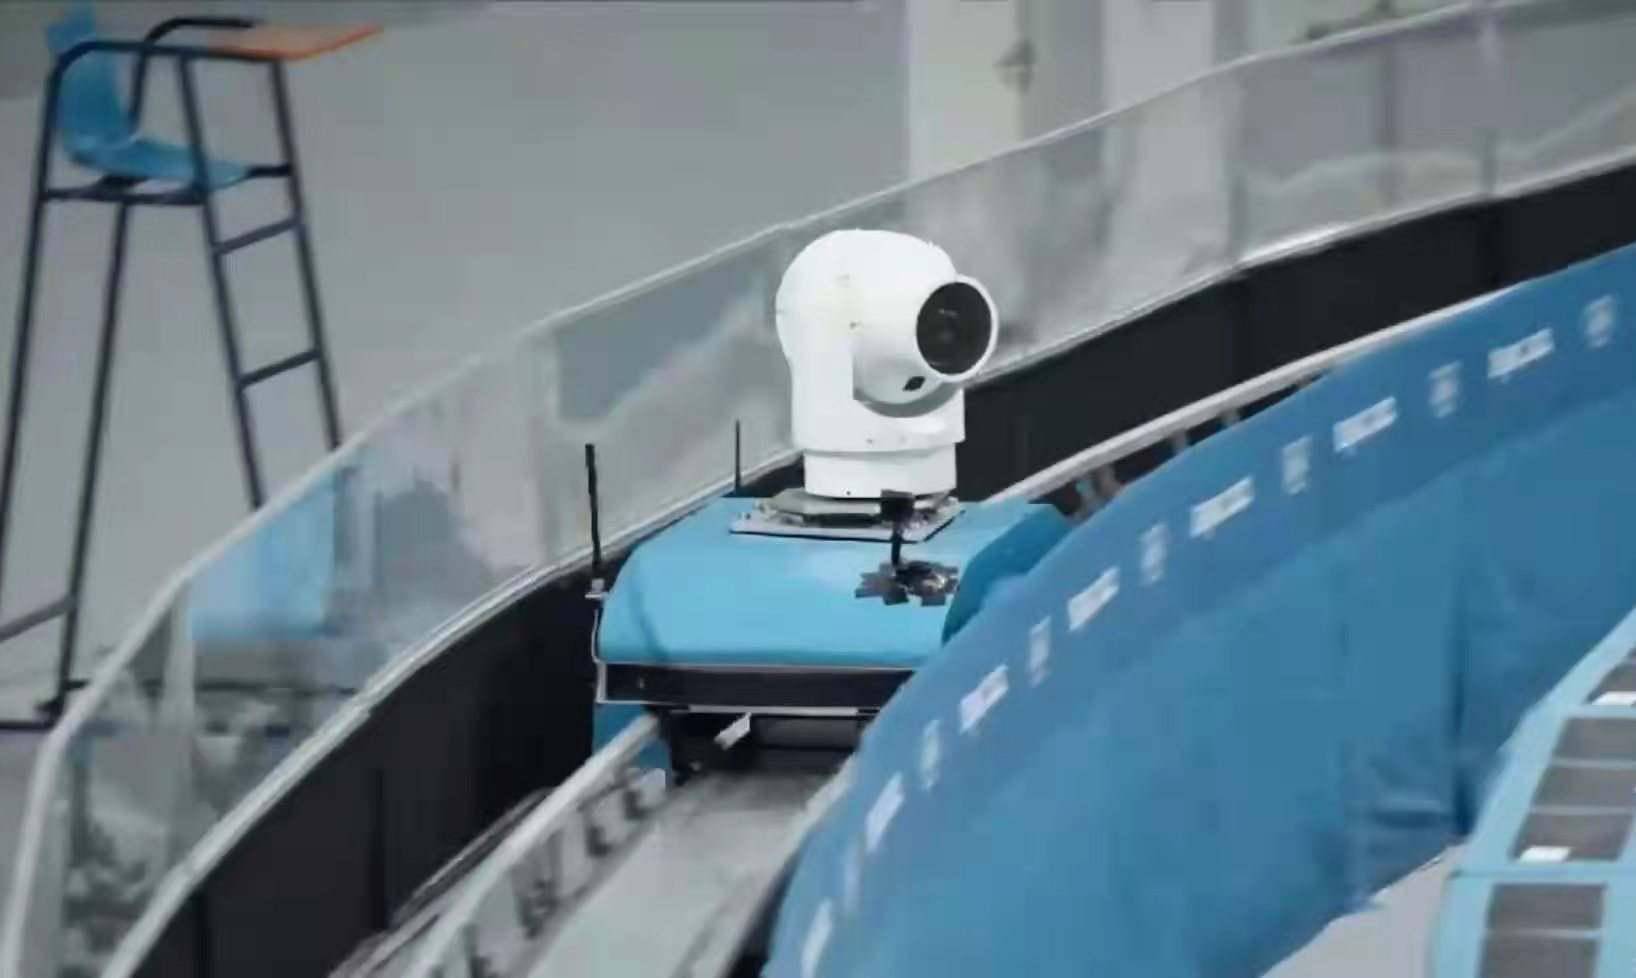 Lie Bao, a 4K high-definition high-speed camera system, is used to broadcast speed skating evetns at Beijing 2022. Photo: Beijing Daily